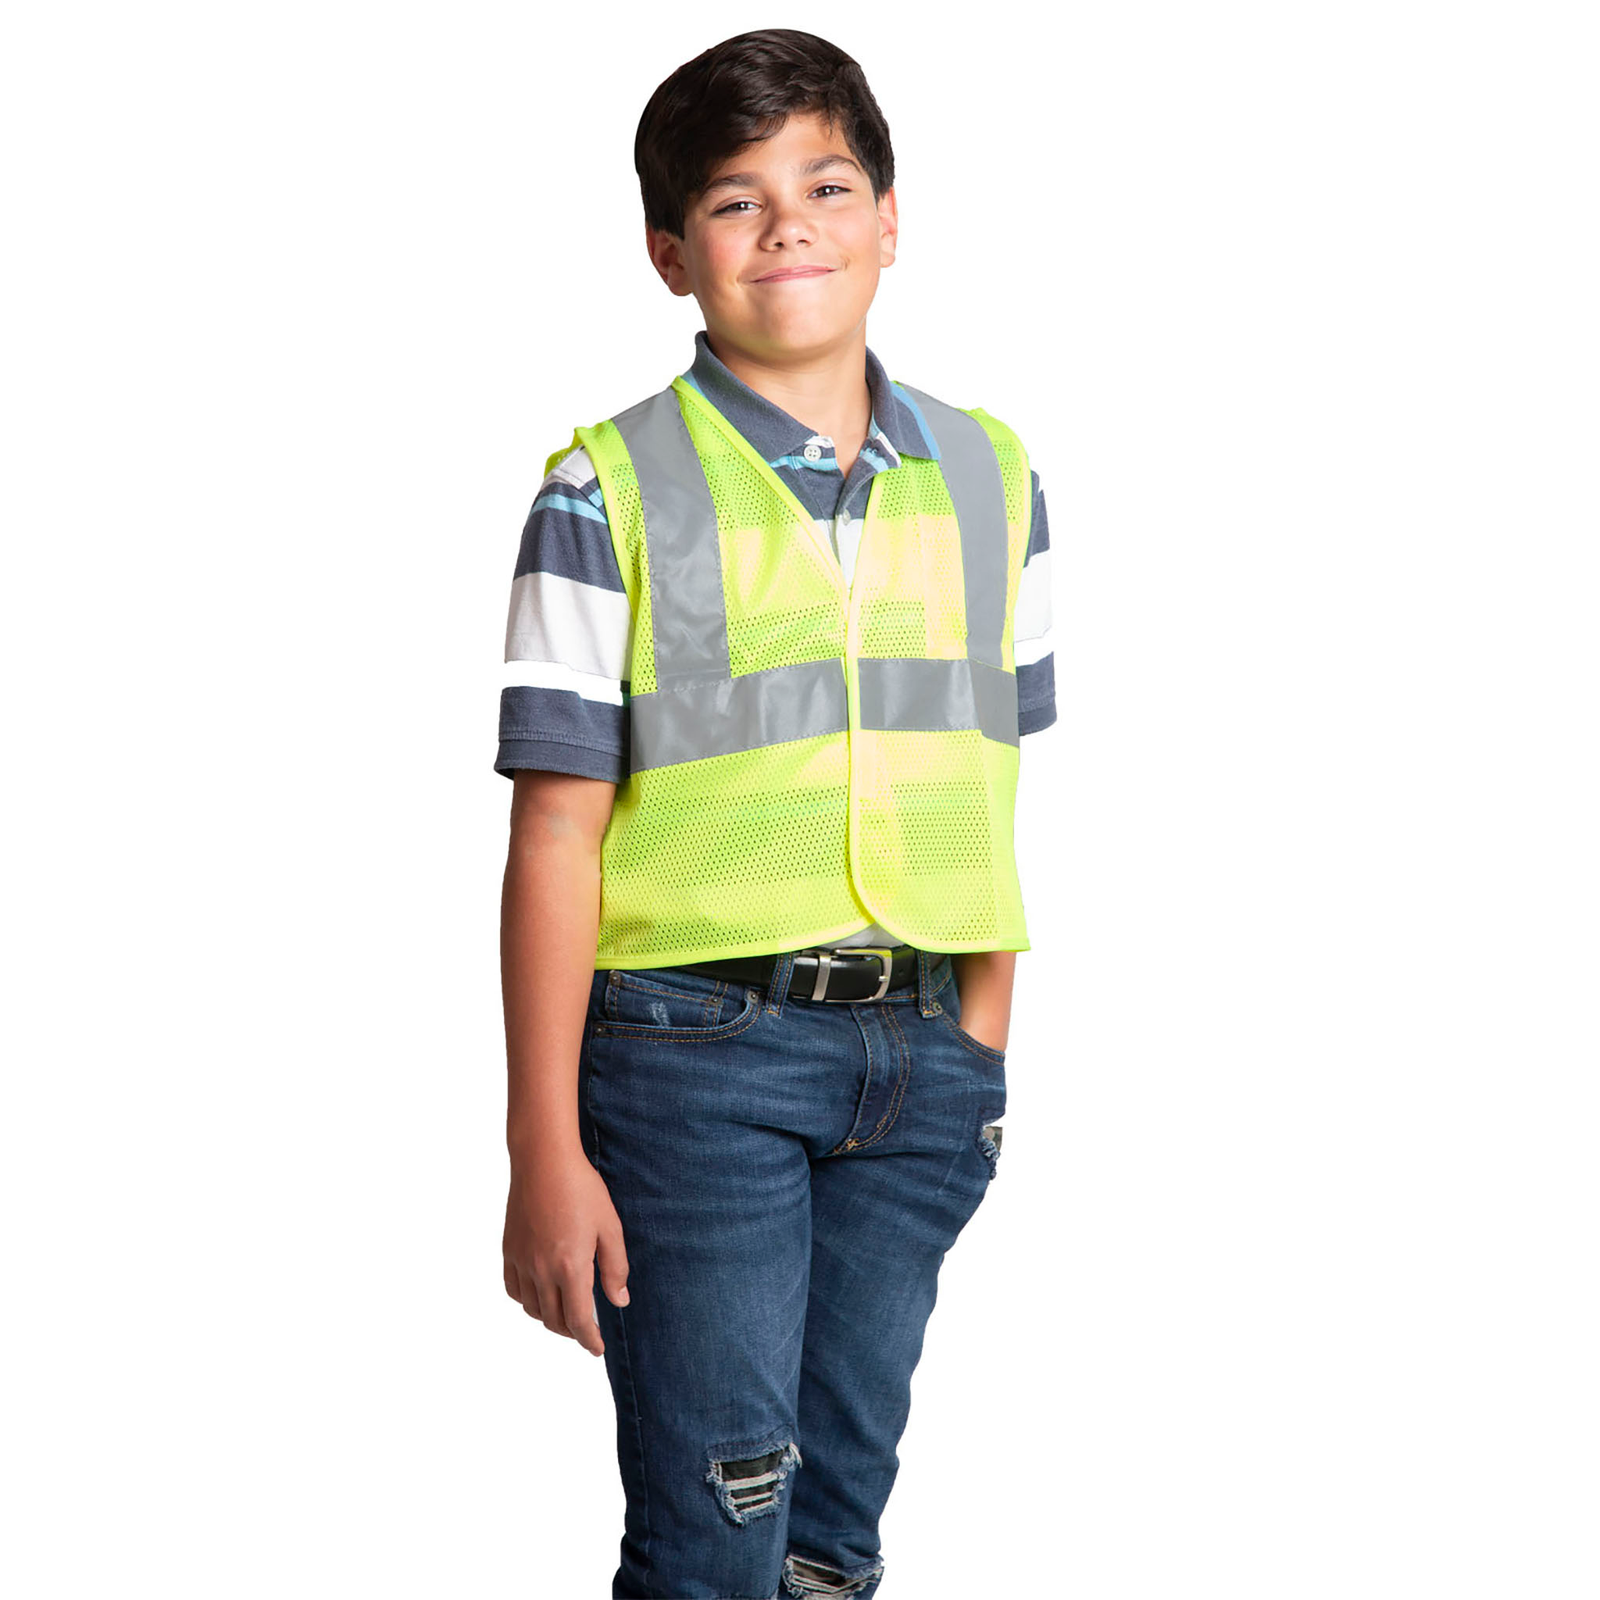 An 11 year old boy wearing a lime JORESTECH safety vest for kids